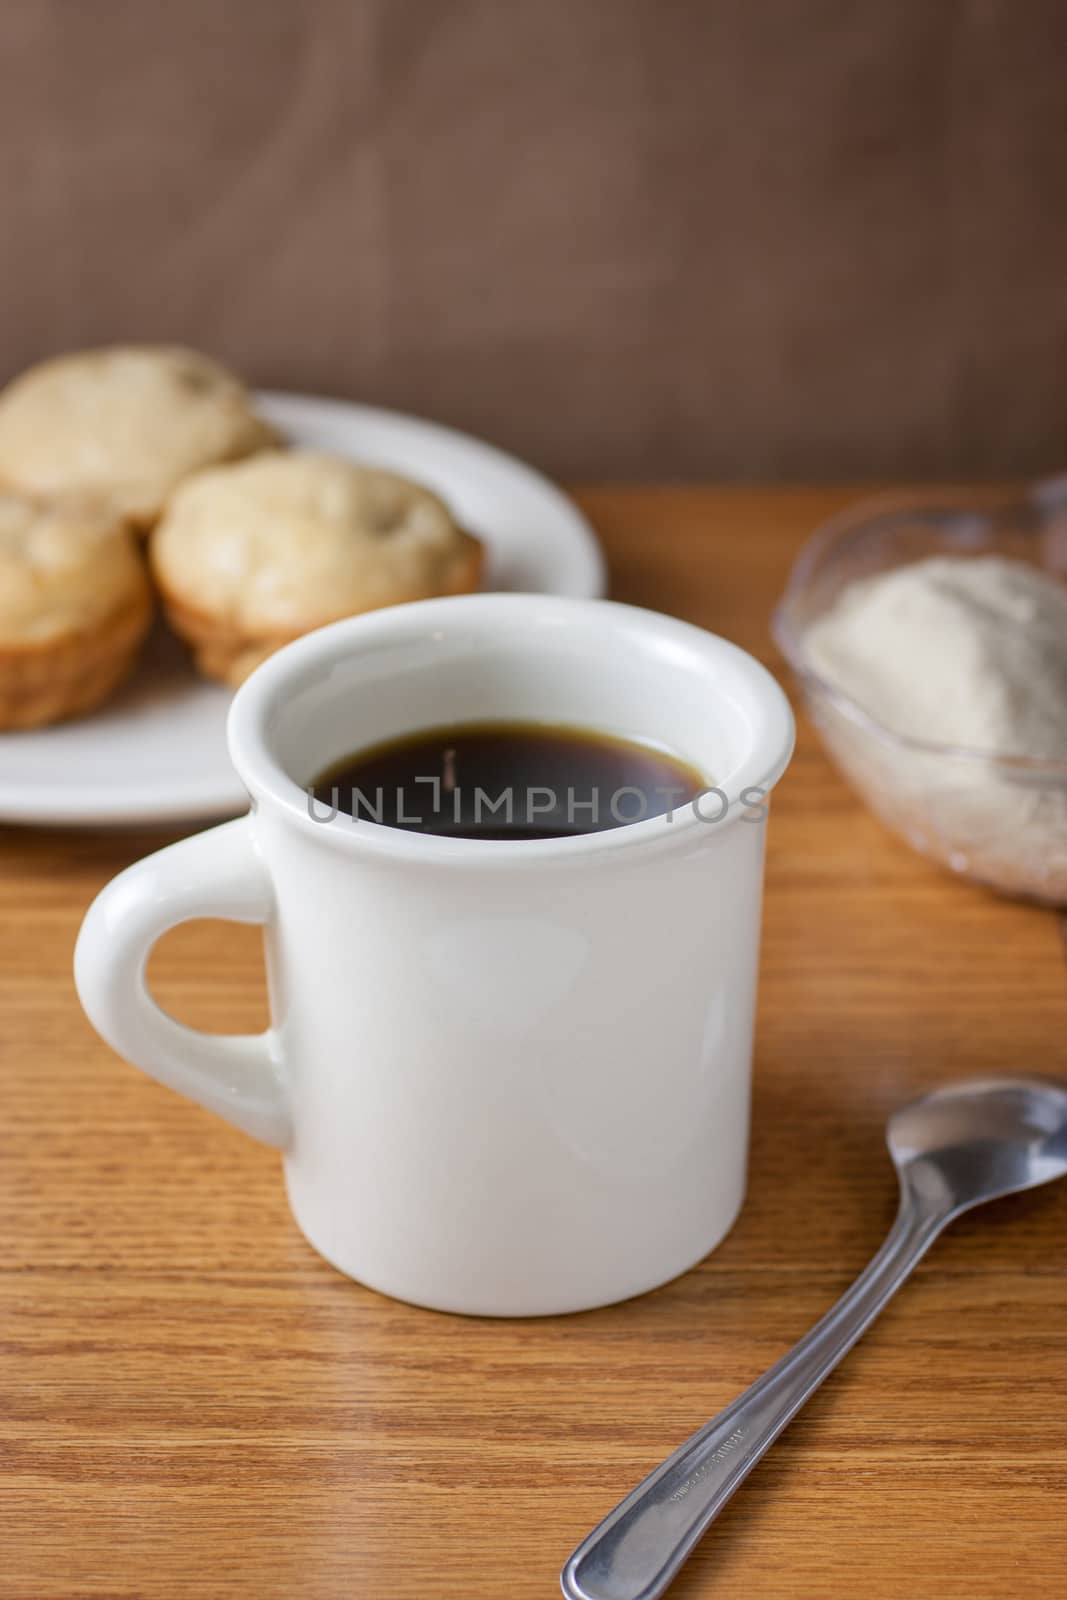 A cup of coffee and metal spoon on a wooden table with apple muffins and a sugar bowl in the background.